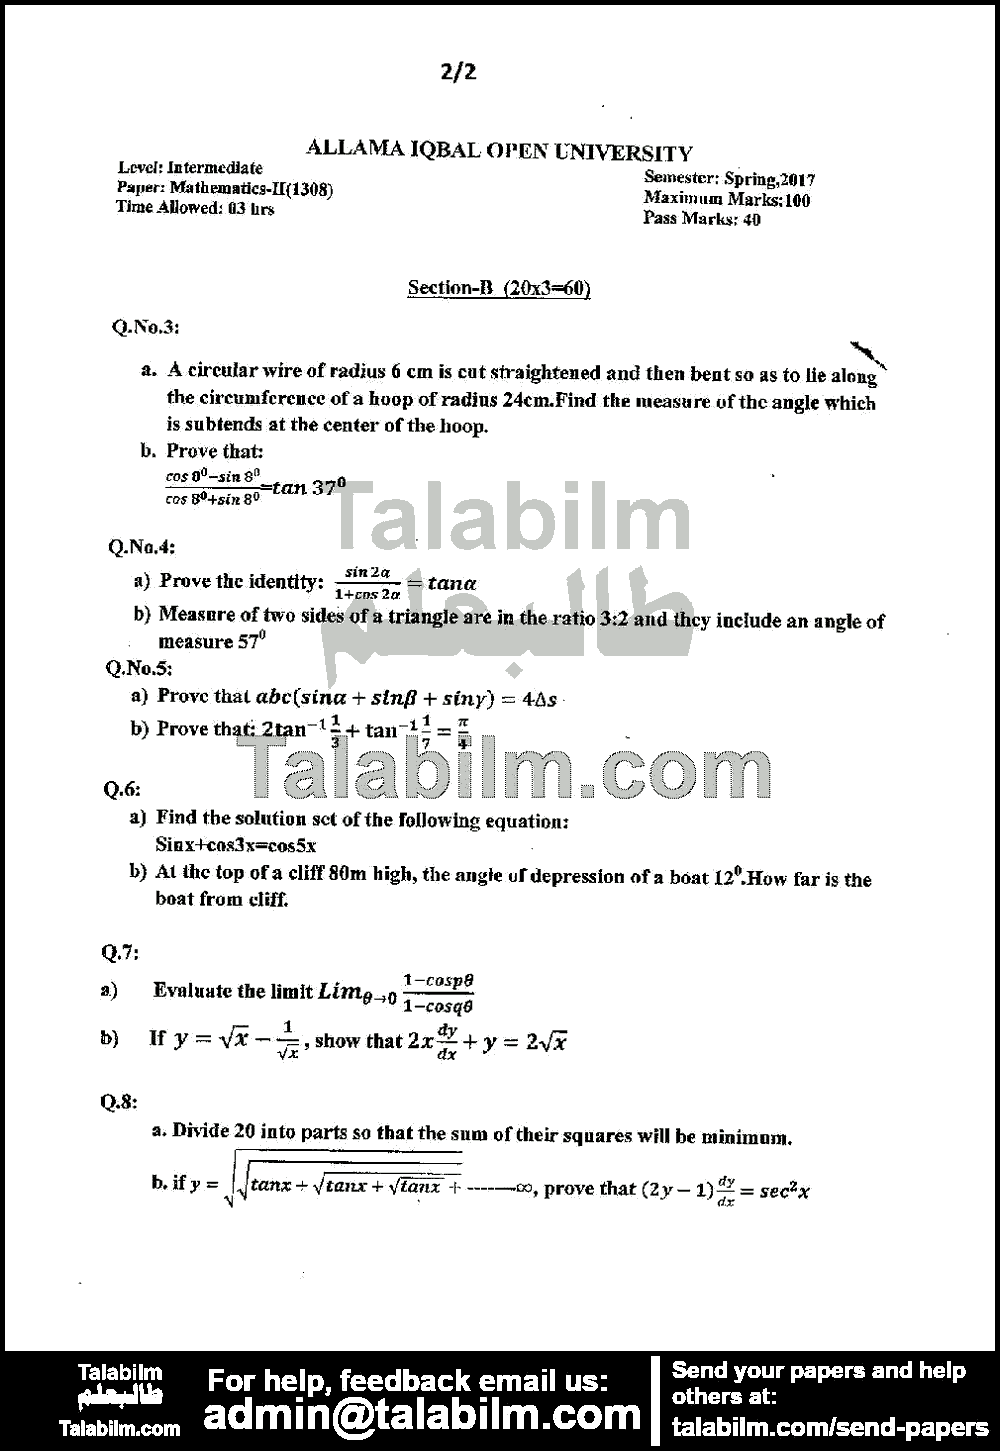 Mathematics-II 1308 past paper for Spring 2017 Page No. 2